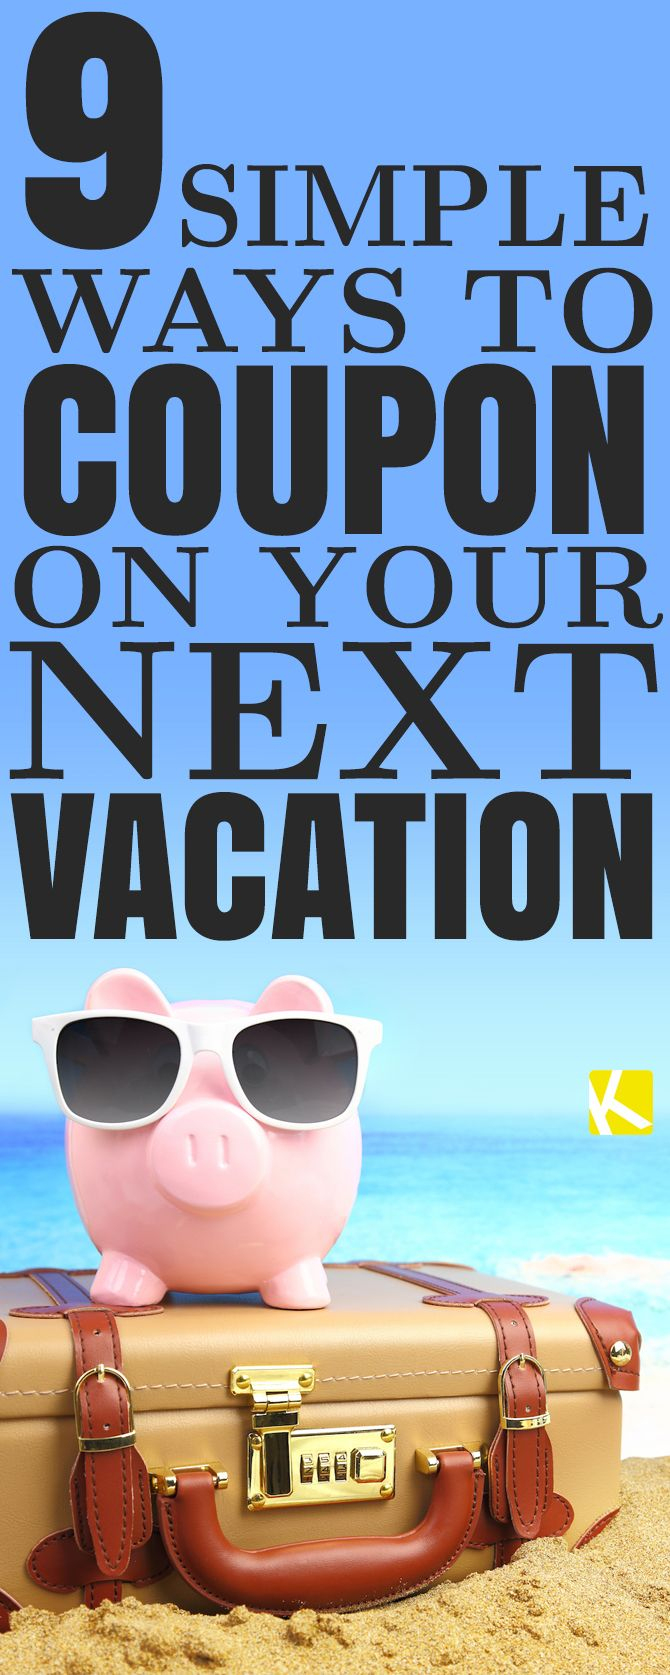 9 Simple Ways To Coupon On Your Next Vacation | Pinterest | Vacation - Free Printable Coupons For Panama City Beach Florida